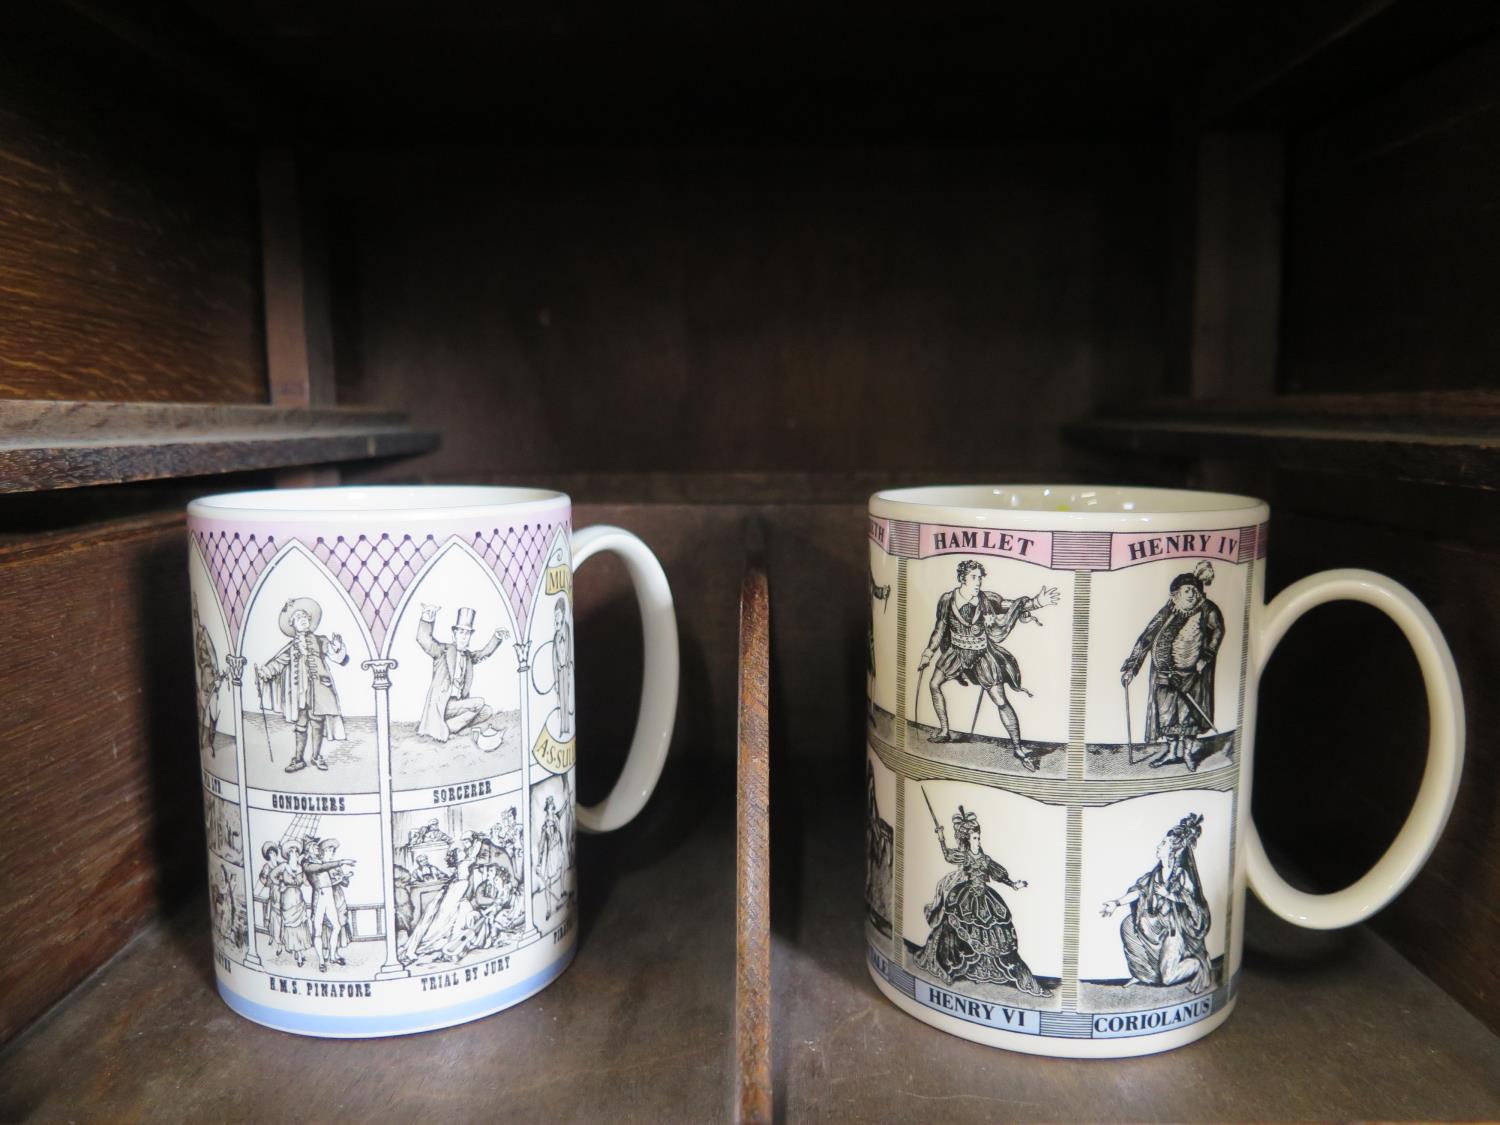 Two Wedgwood mugs commemorating Gilbert and Sullivan operas and William Shakespeare